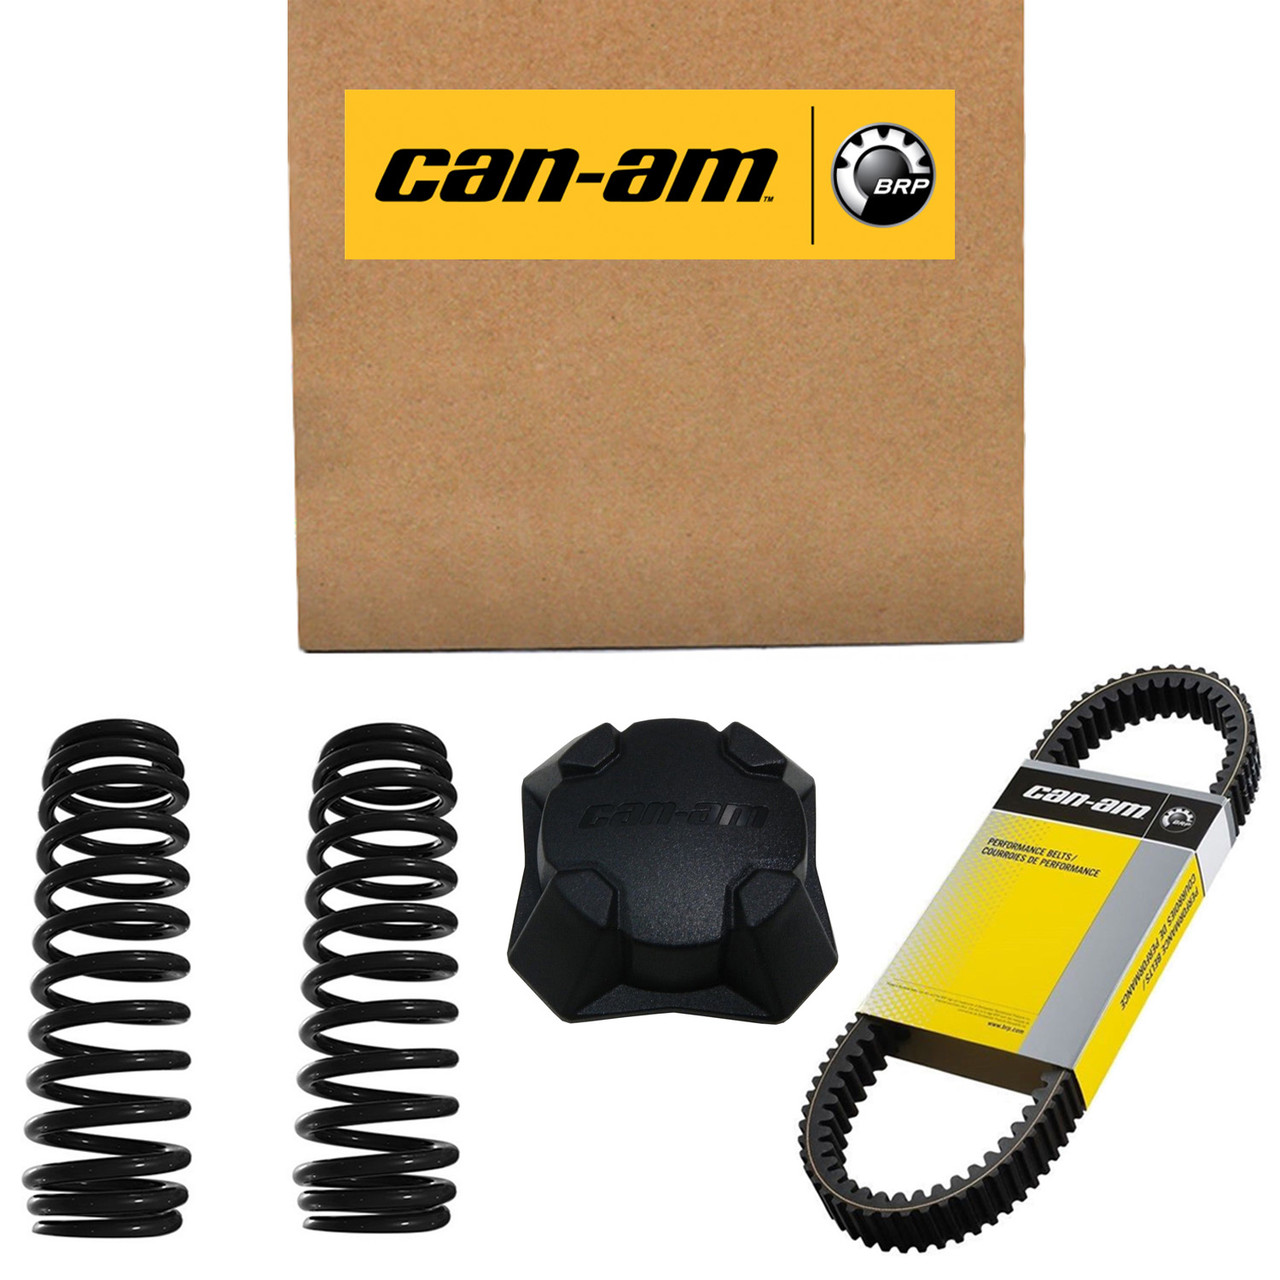 Can-Am New OEM Electronic Box, 420666952